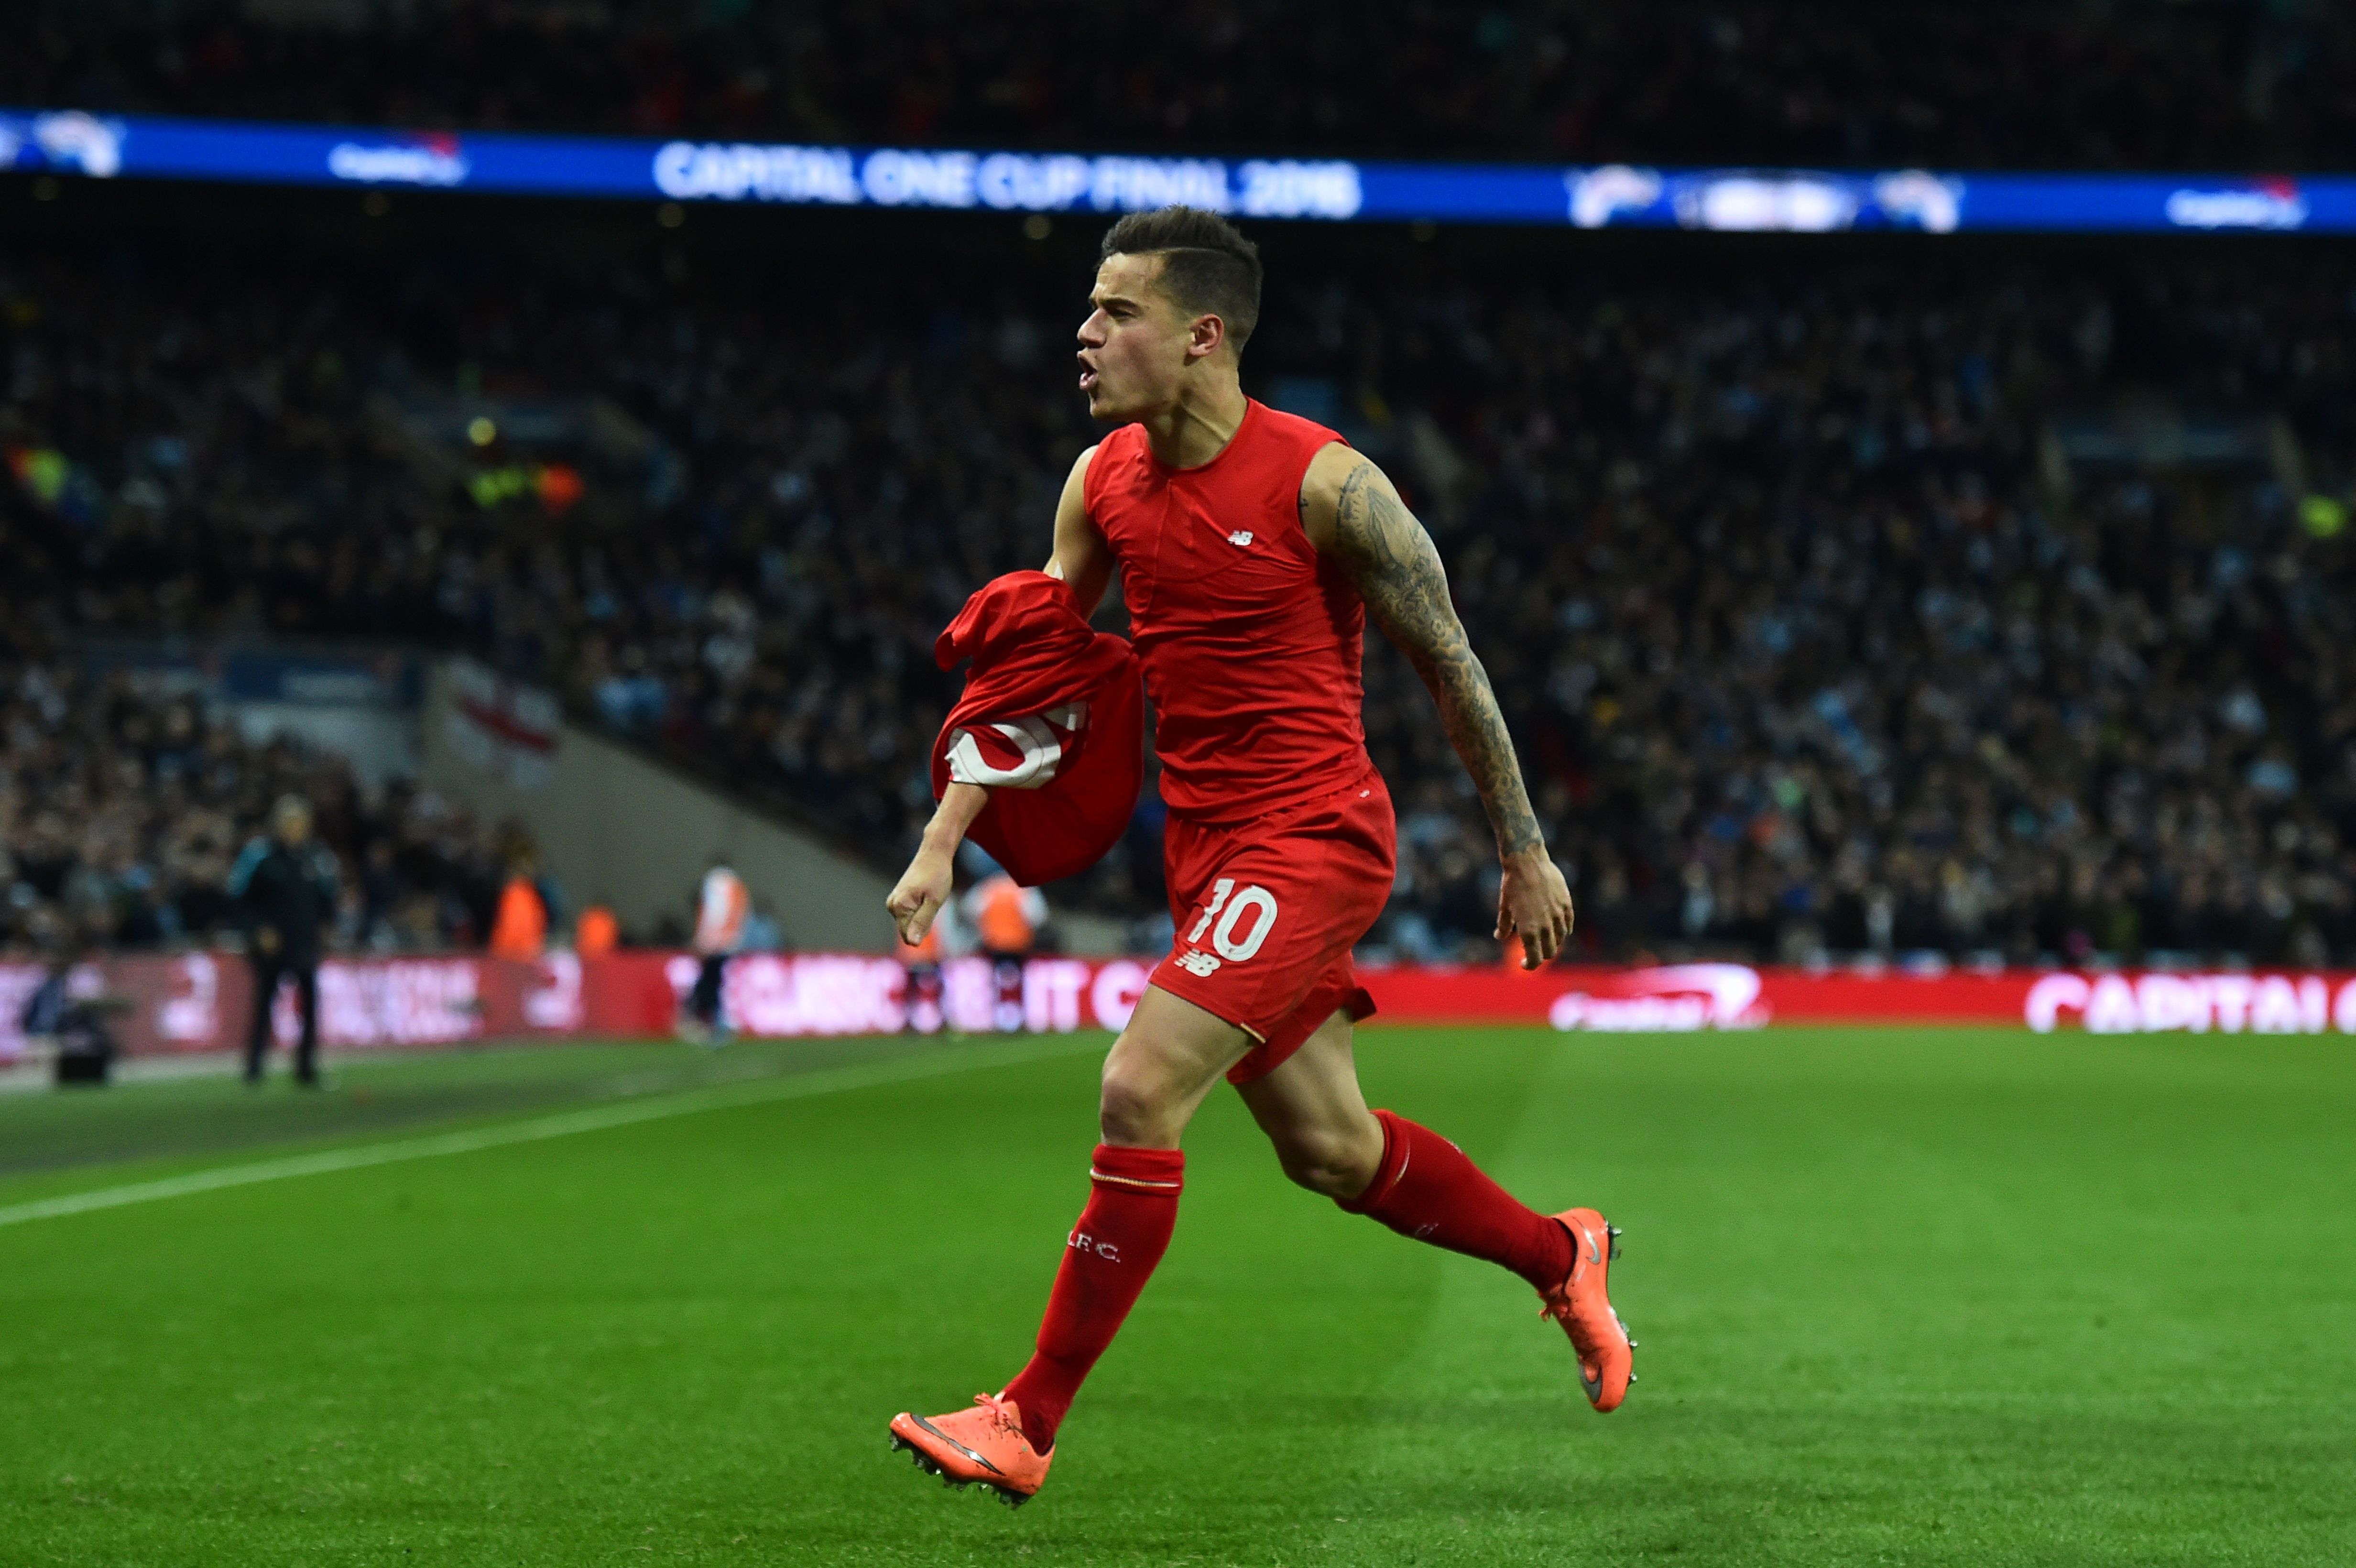 Liverpool's Brazilian midfielder Philippe Coutinho celebrates scoring their first goal to equalise 1-1 during the English League Cup final football match between Liverpool and Manchester City at Wembley Stadium in London on February 28, 2016. / AFP / BEN STANSALL / RESTRICTED TO EDITORIAL USE. No use with unauthorized audio, video, data, fixture lists, club/league logos or 'live' services. Online in-match use limited to 75 images, no video emulation. No use in betting, games or single club/league/player publications. / (Photo credit should read BEN STANSALL/AFP/Getty Images)